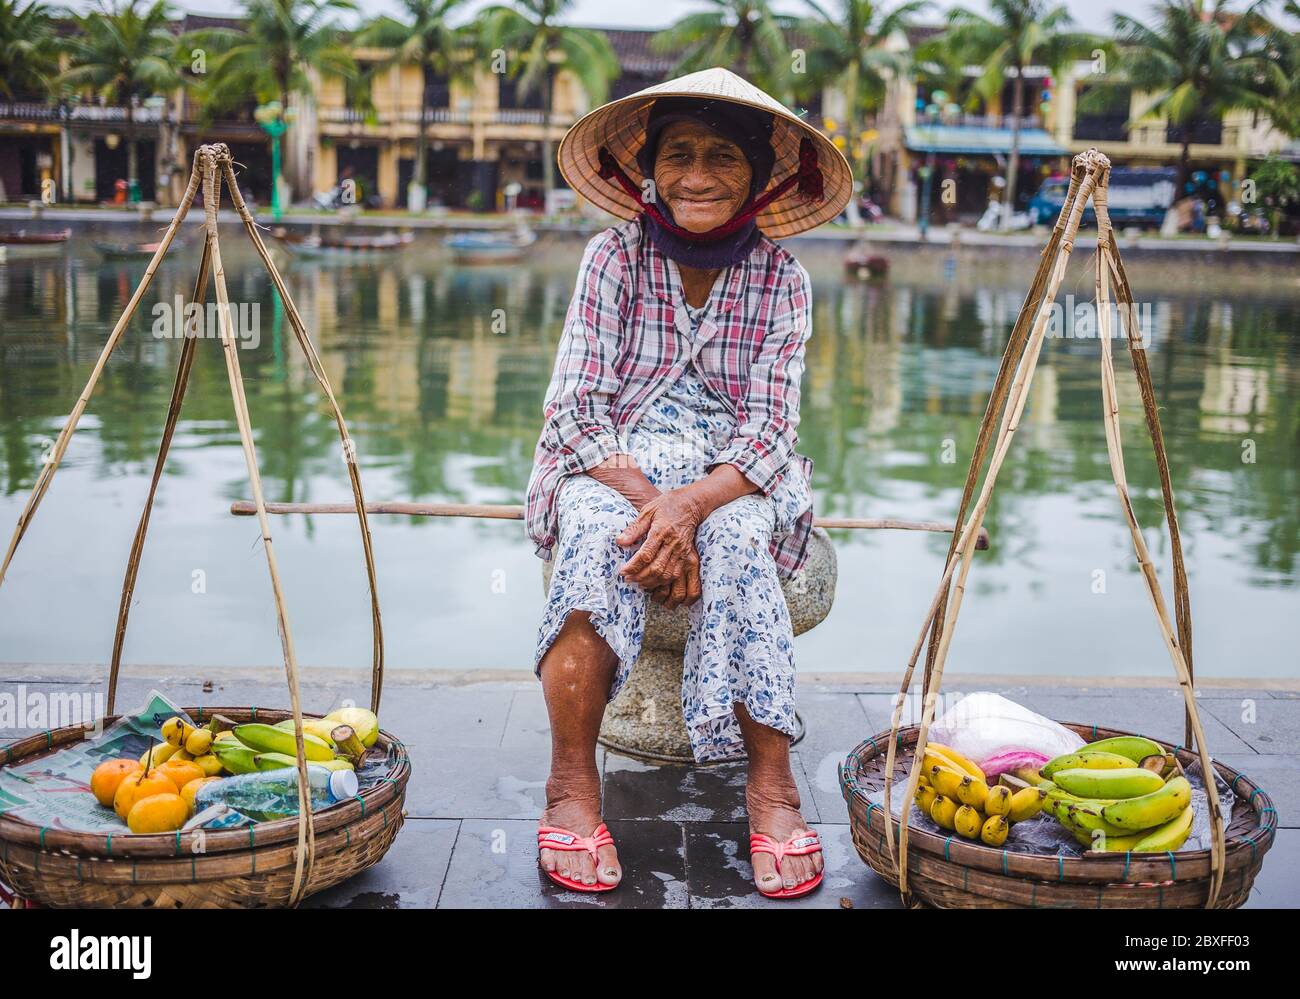 HOI AN, VIETNAM - 27TH MARCH 2017: An elderly lady waiting by the side of the river in Hoi An selling to sell fruit. Stock Photo